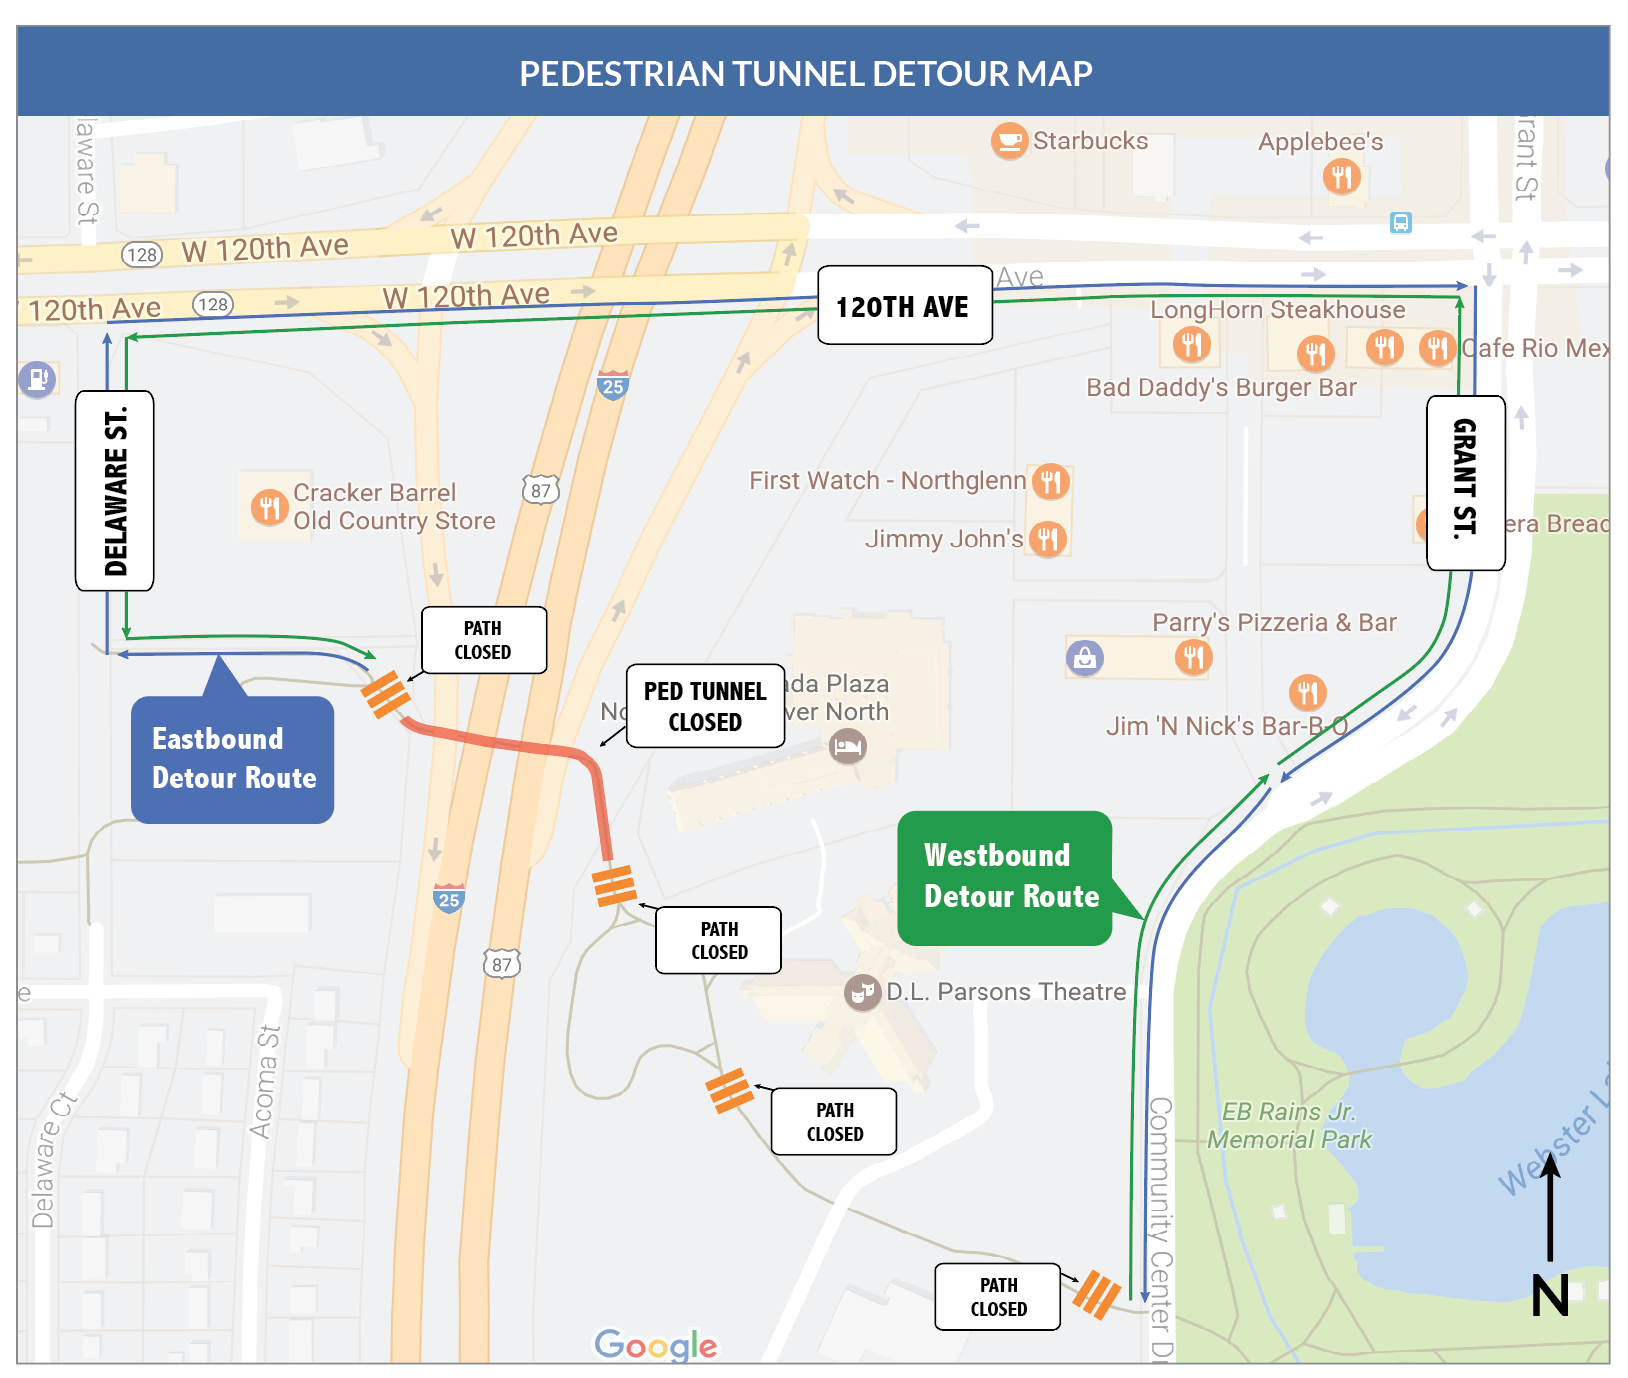 May-June Pedestrian Tunnel Closure.png detail image